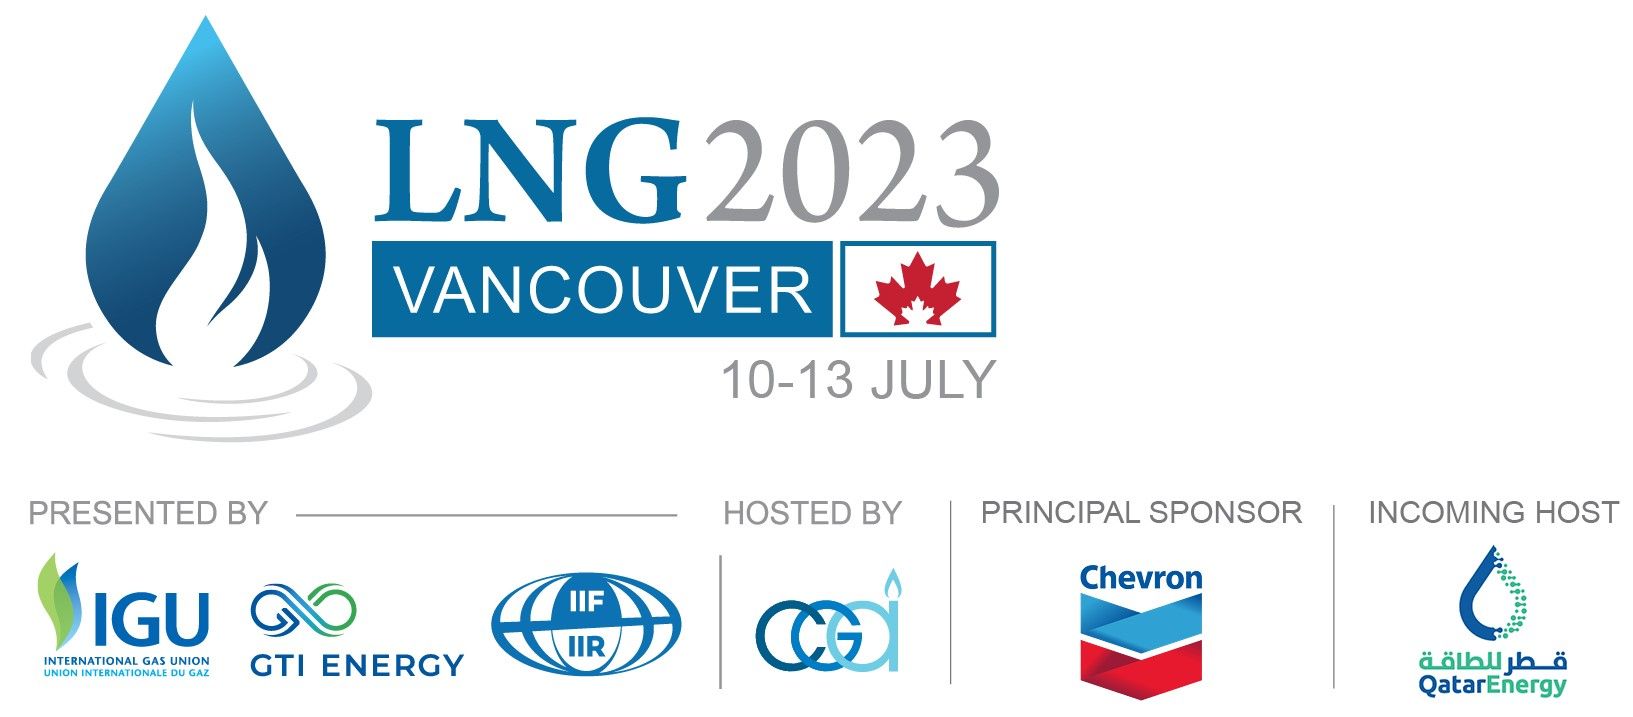 Measuring up to the Methane Challenge LNG 2023